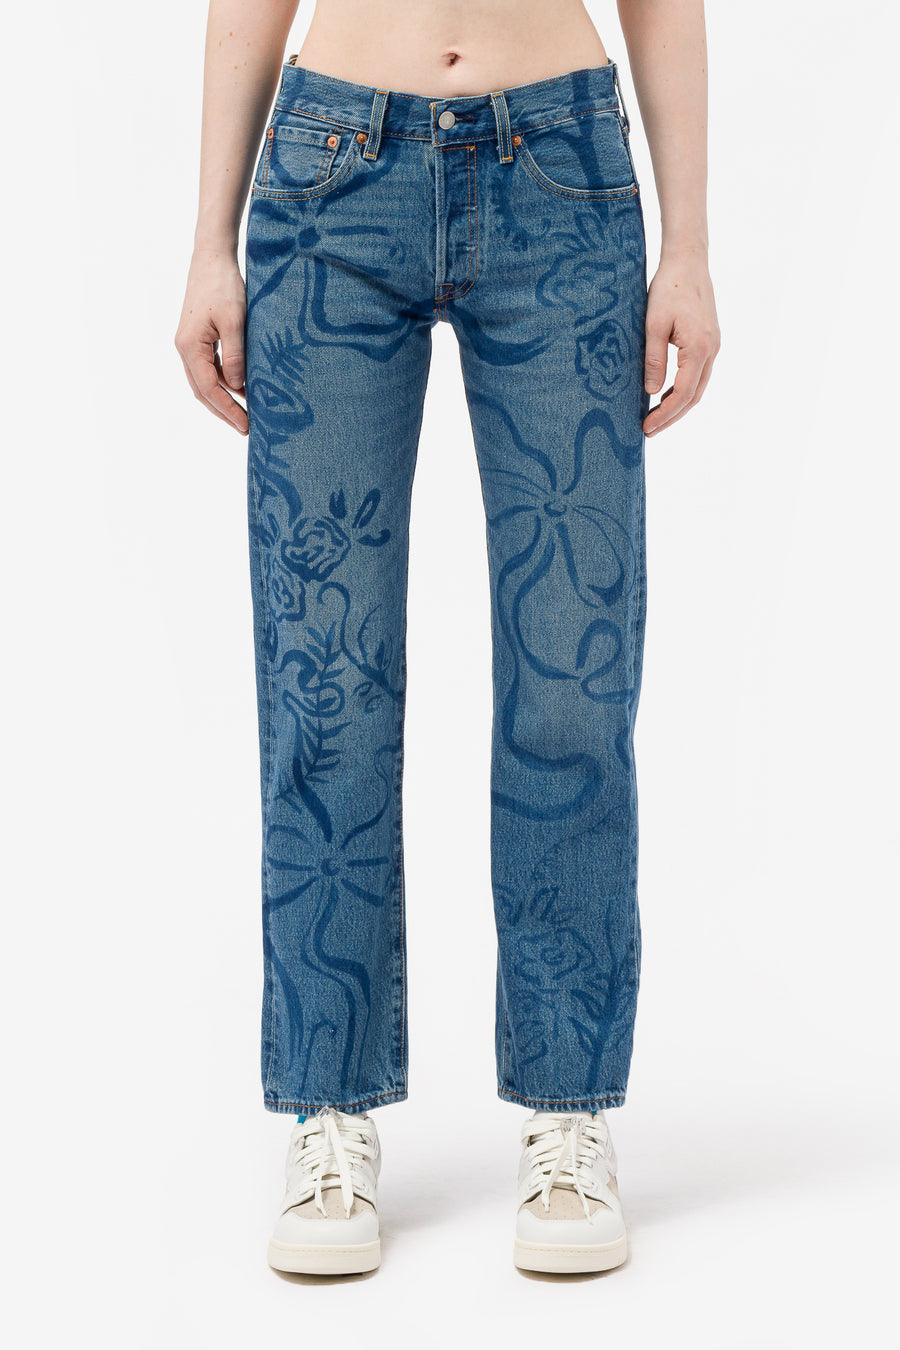 Collina Strada - Women's Levis Painted 501's in Laurel Ashleigh Floral -  Notre